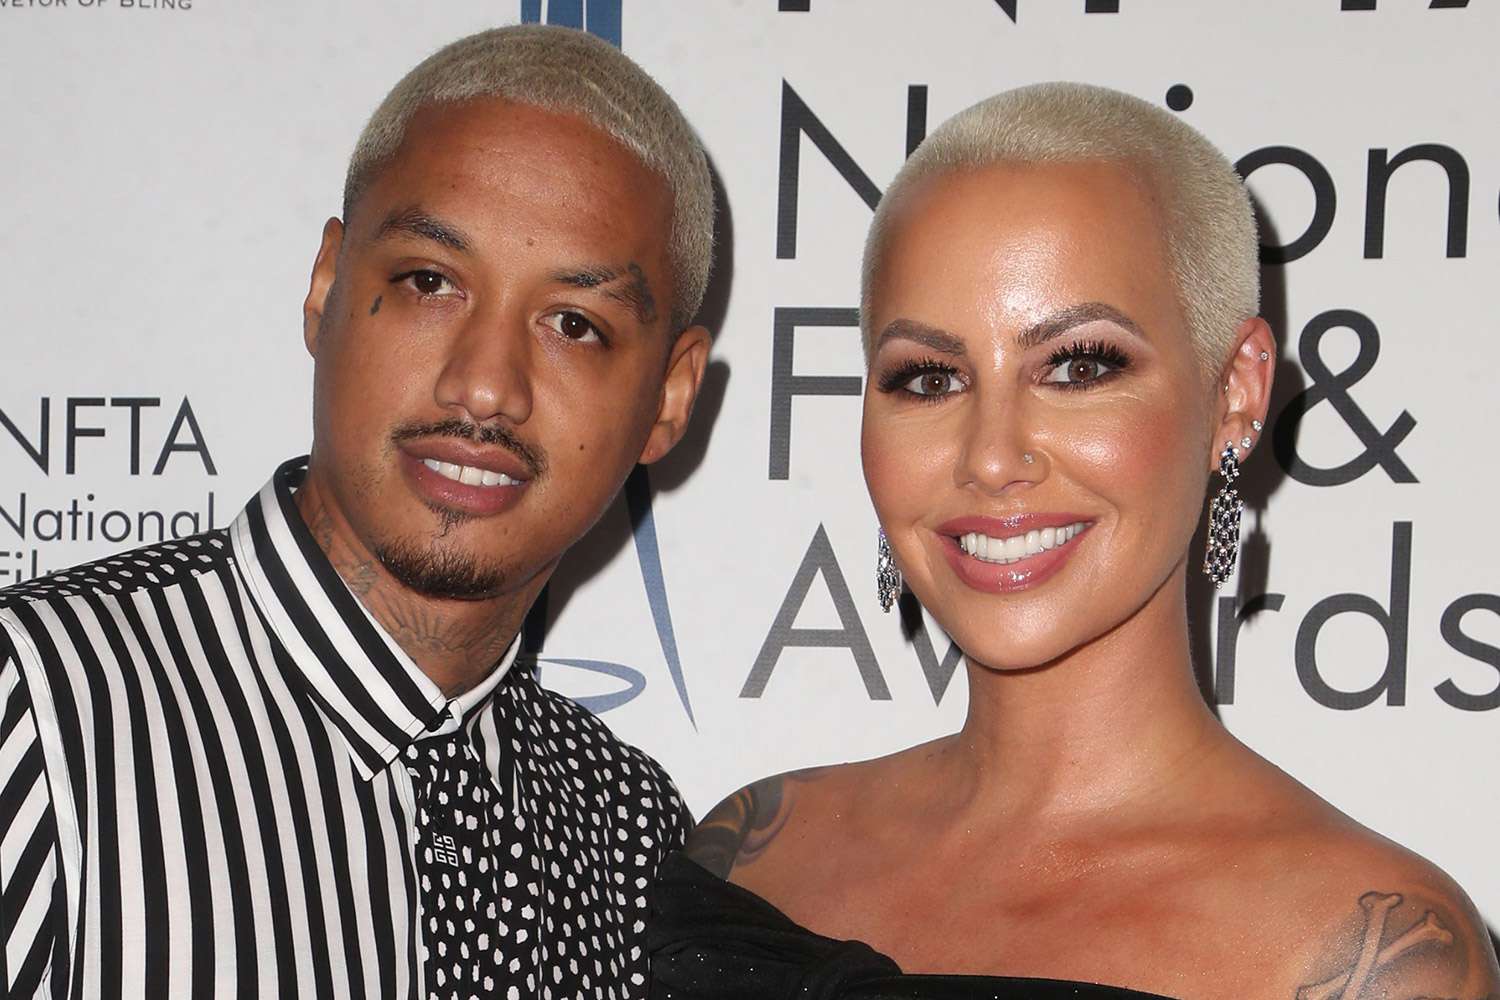 Amber Rose's Partner Alexander 'AE' Edwards Admits to Cheating on Her with 12 여성